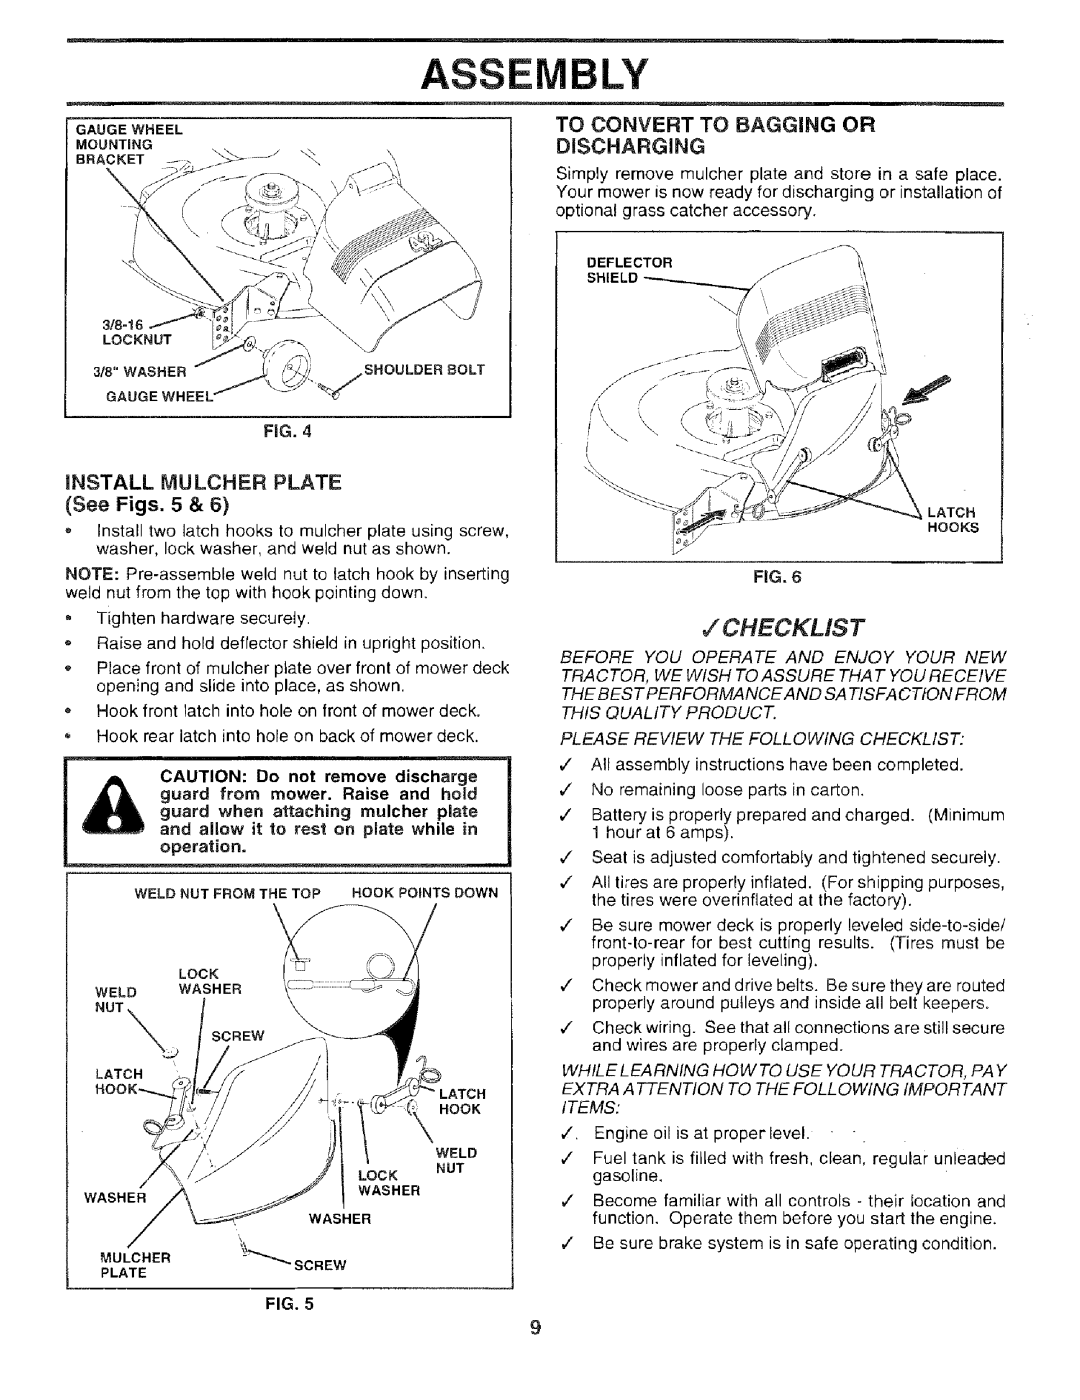 Sears 917.259567 owner manual Checklist, iNSTALL MULCHER PLATE See Figs. 5, To Convert To Bagging Or, Discharging 